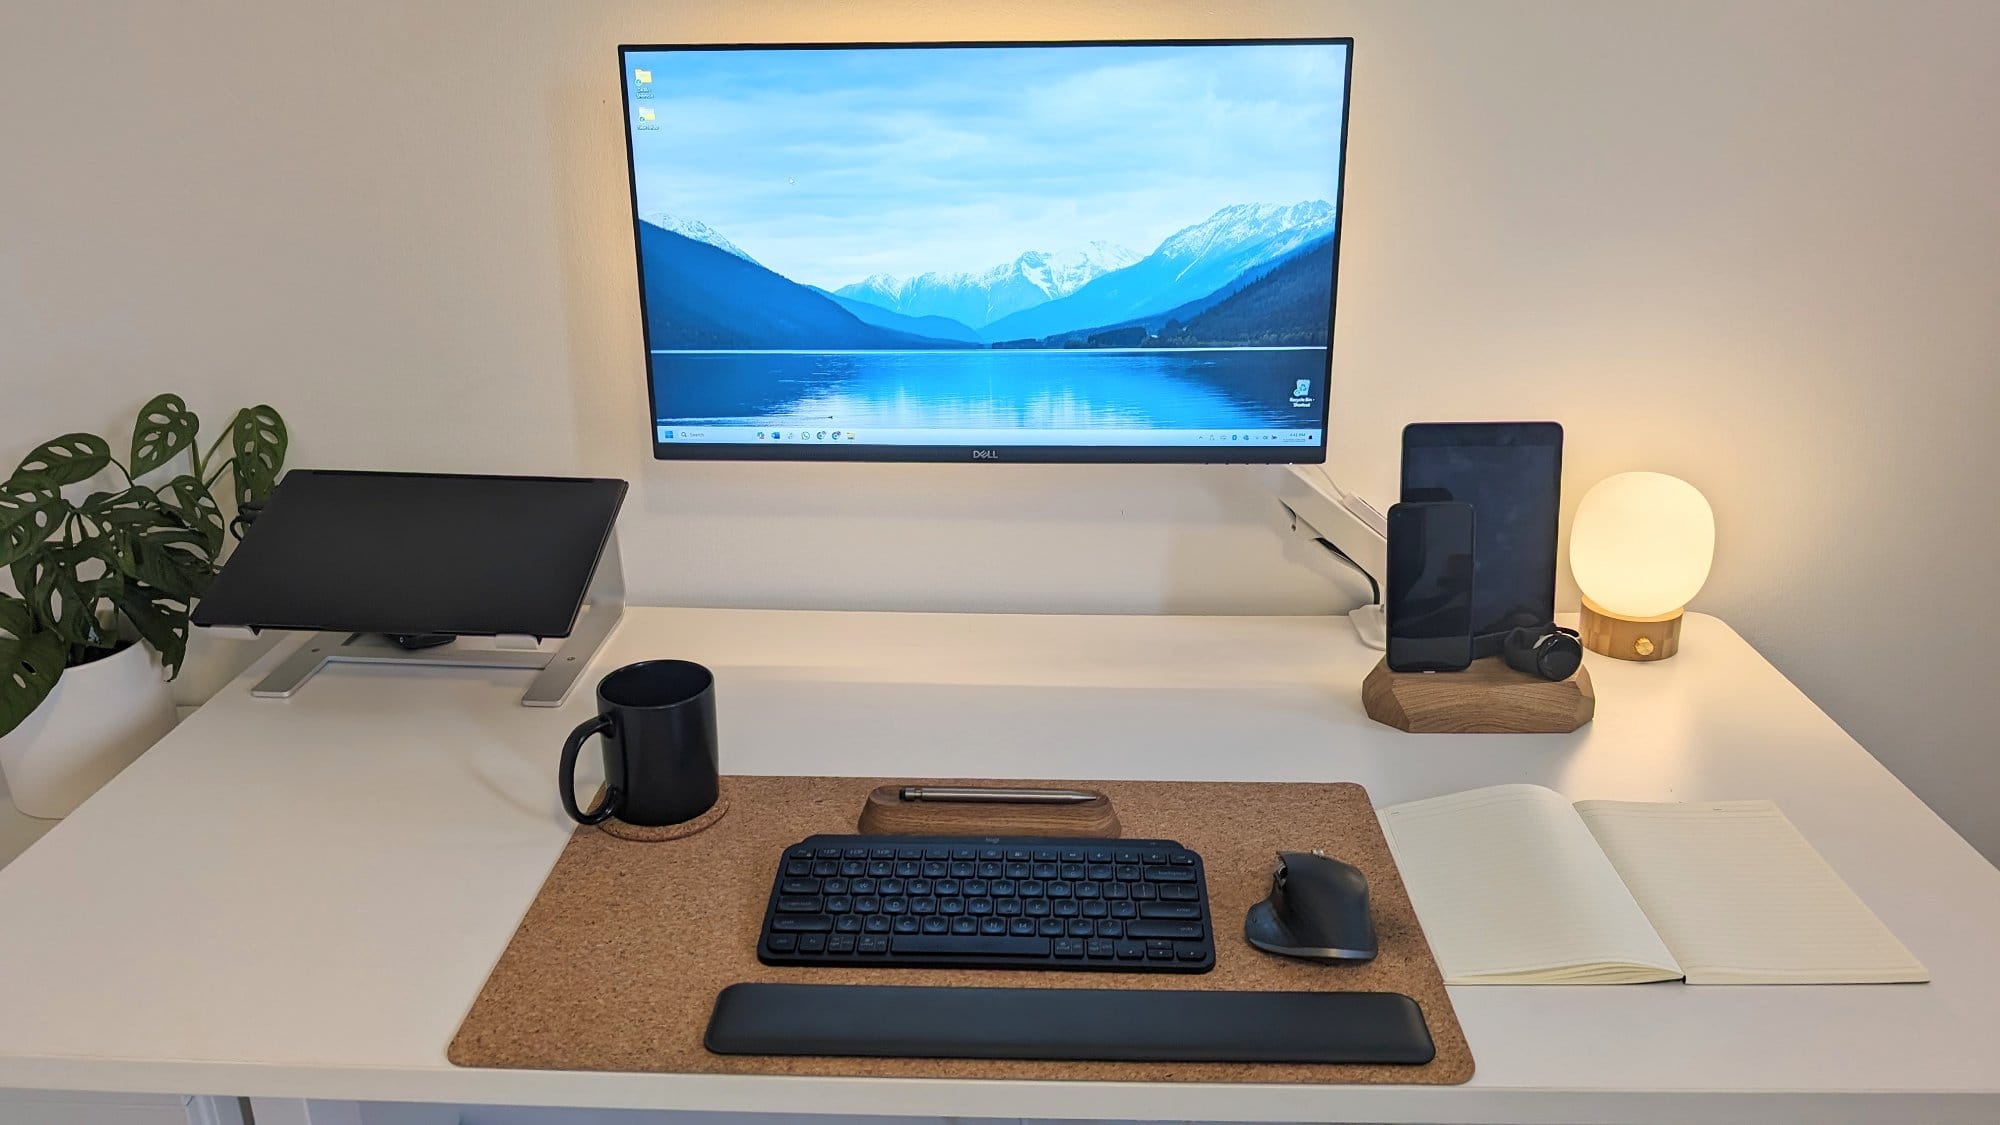 A well-arranged workstation with a large monitor, a laptop on a stand, a black mug, a wireless keyboard and mouse on a cork mat, as well as a tablet and smartphone on a wooden Oakywood charging dock